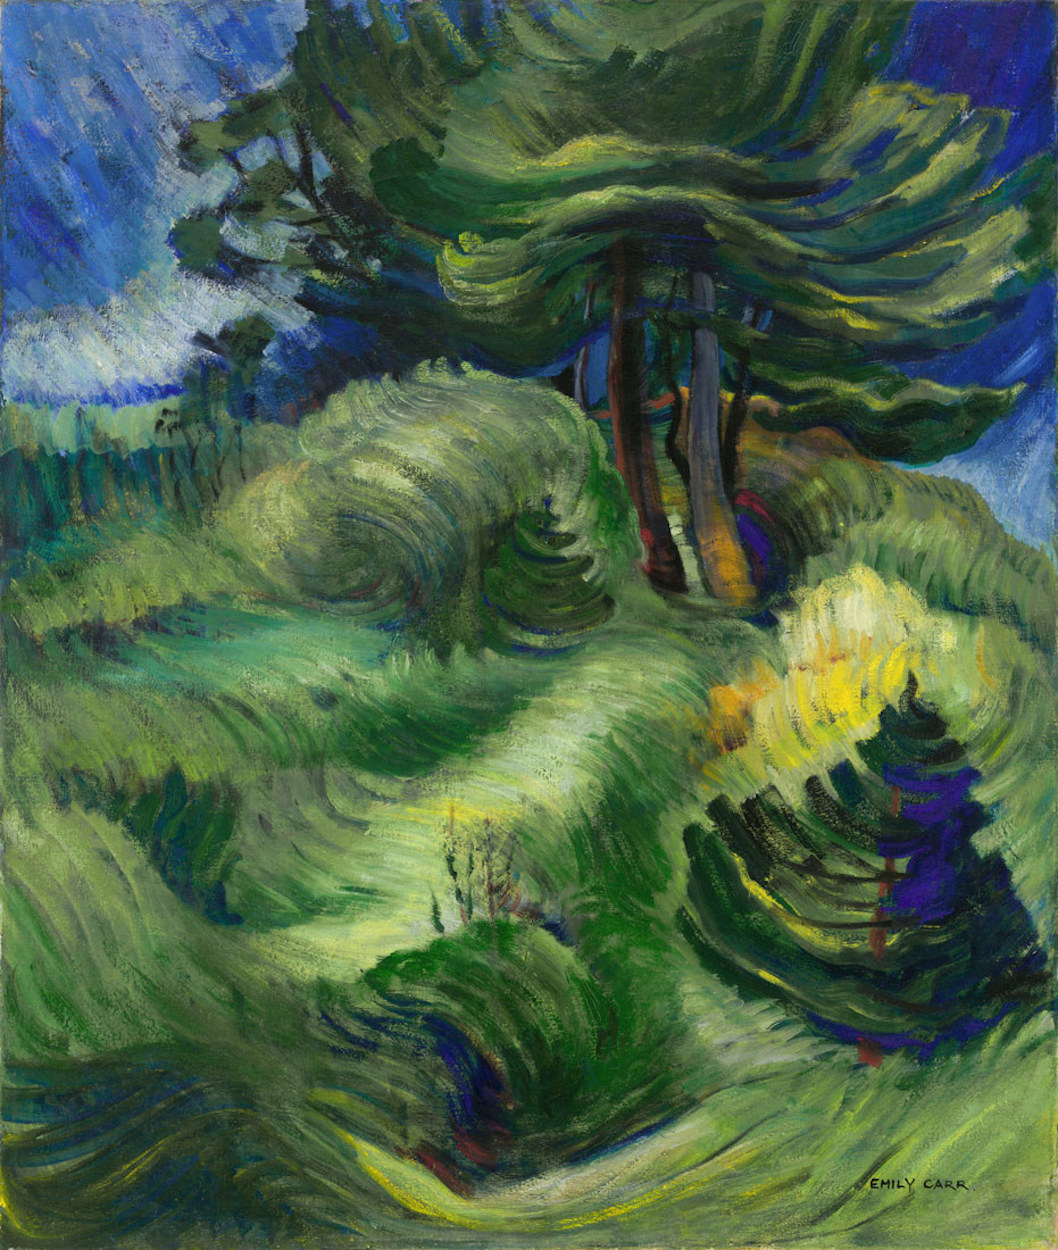 Tossed by the Wind by Emily Carr - 1939 - 81.6 x 69.2 cm private collection